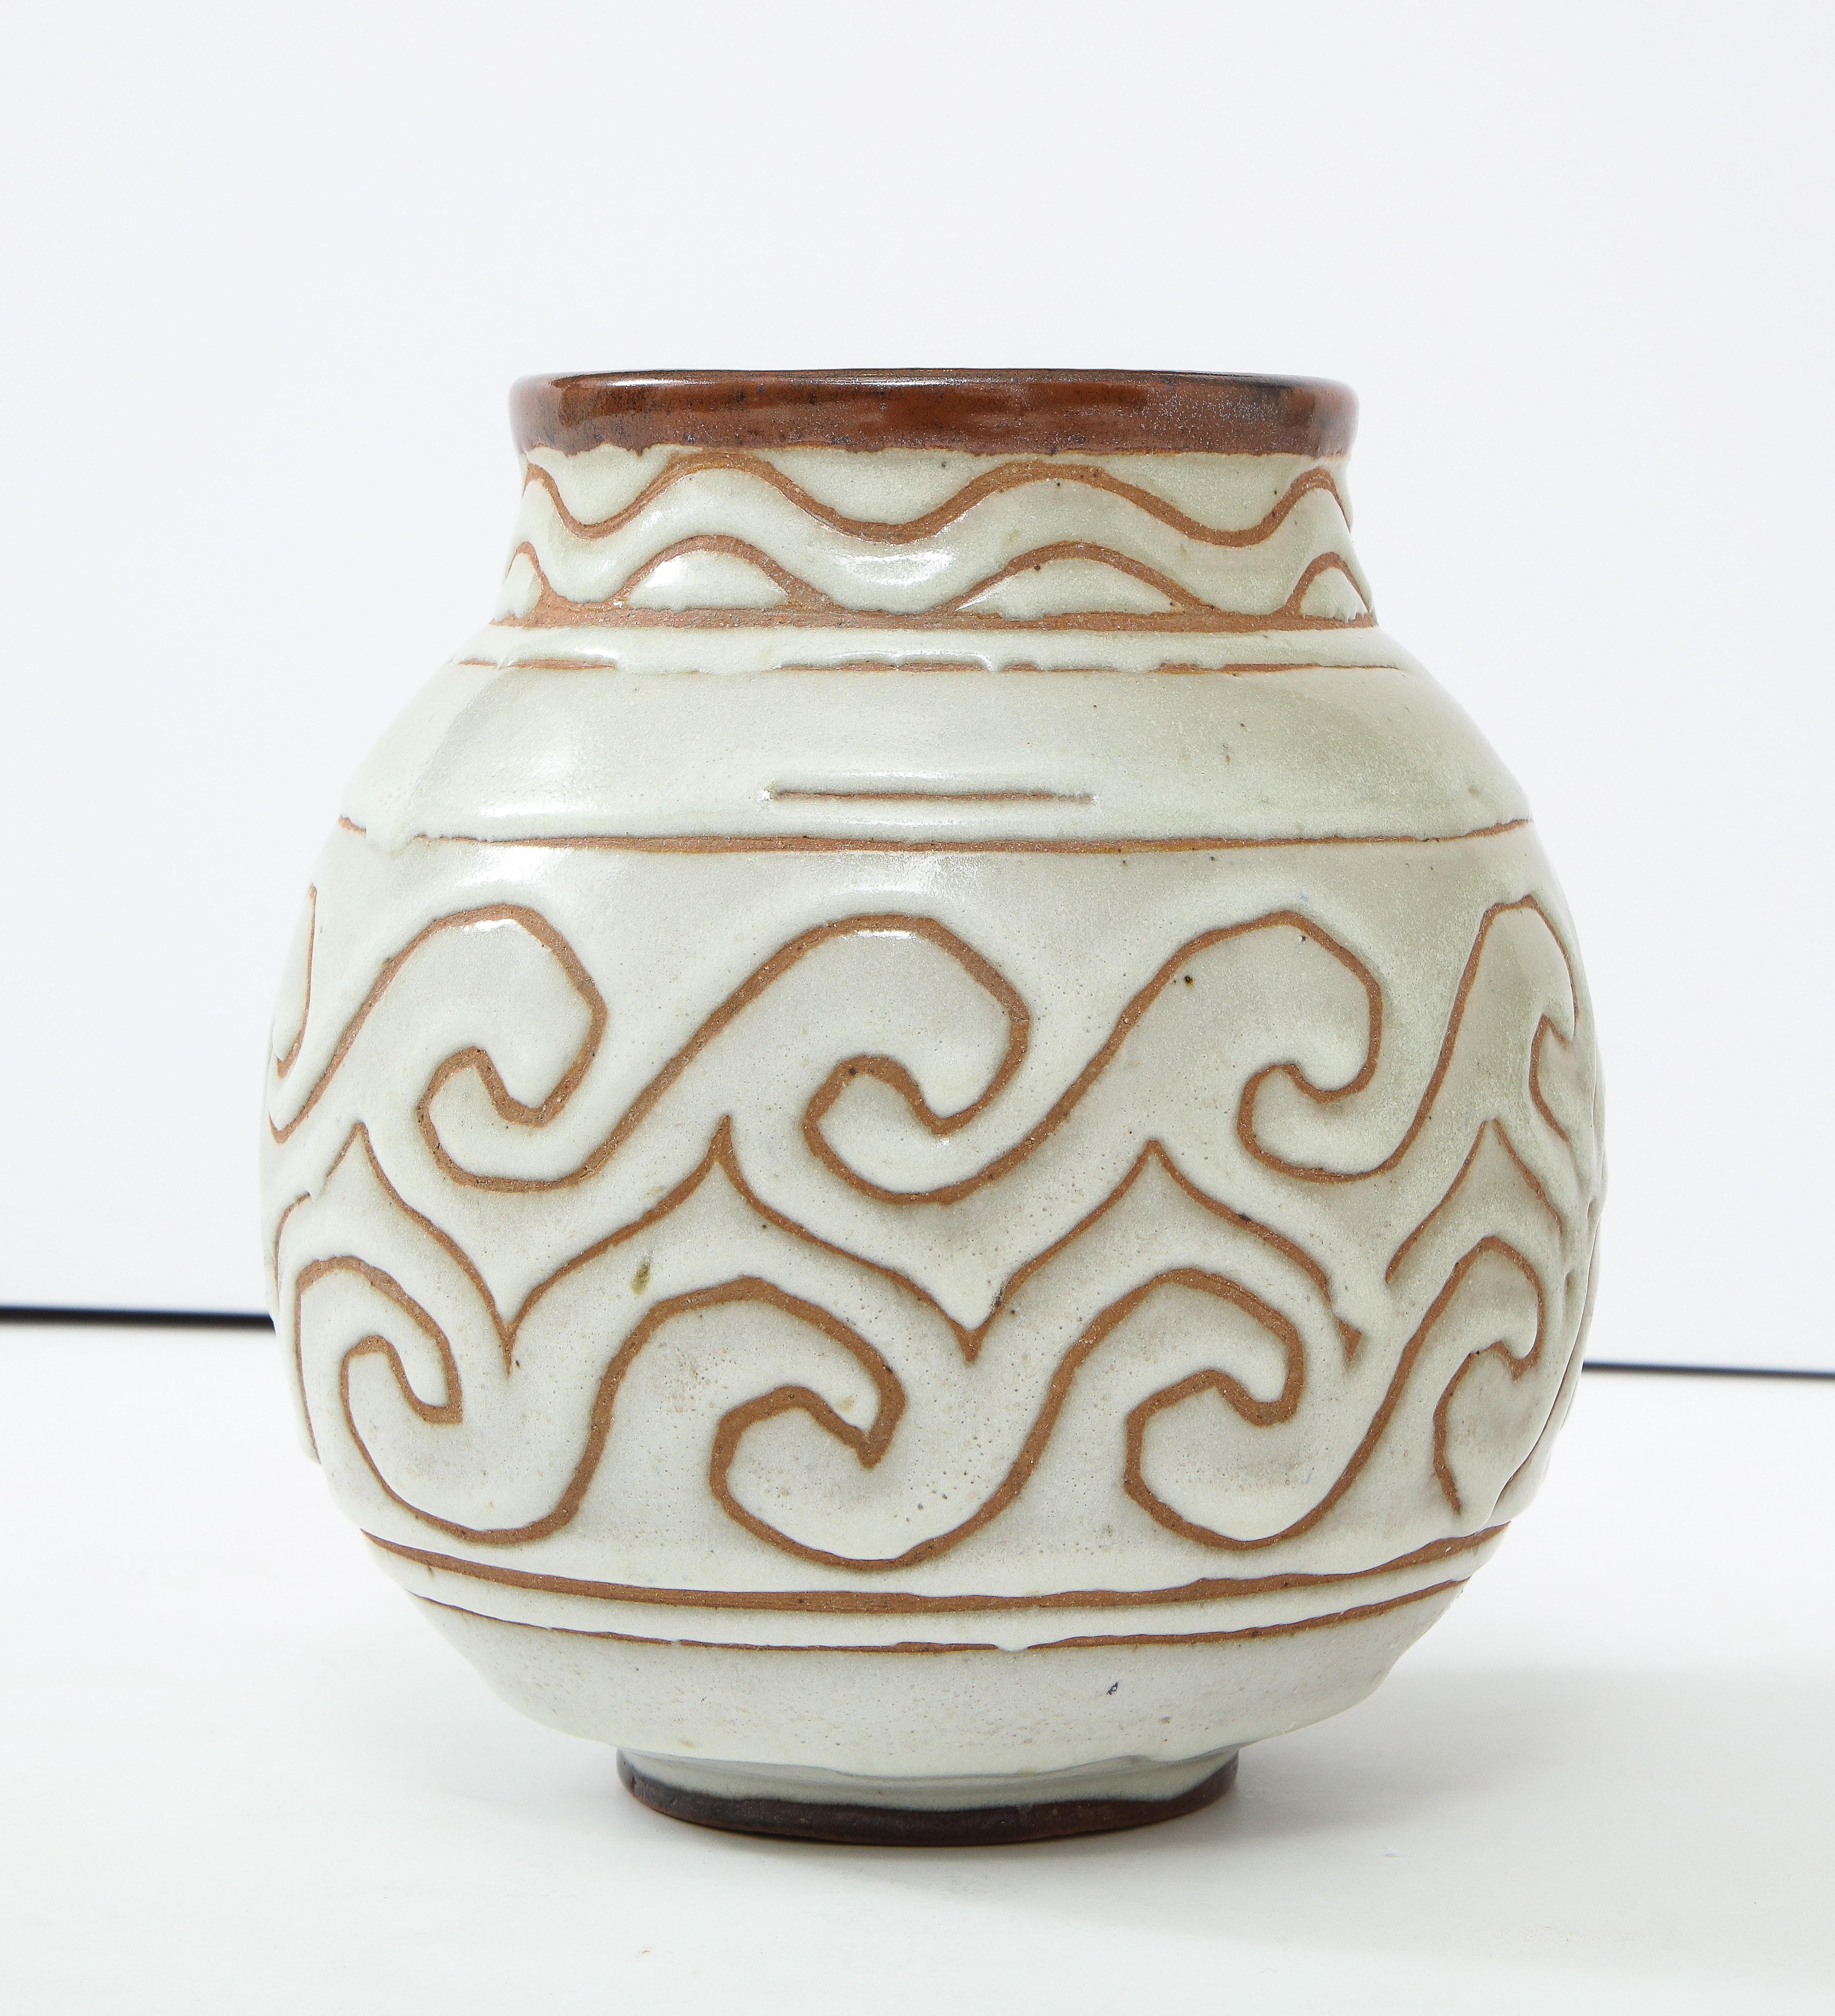 Georges Serré (1889-1956) Art Deco ceramic white/celadon enamel ball shaped vase with wide neck, France, circa 1930, signed

Repeating wave pattern & glaze drips
Measures: Height 8.75, diameter 8.5 in.

Georges Serré references:

La Céramique